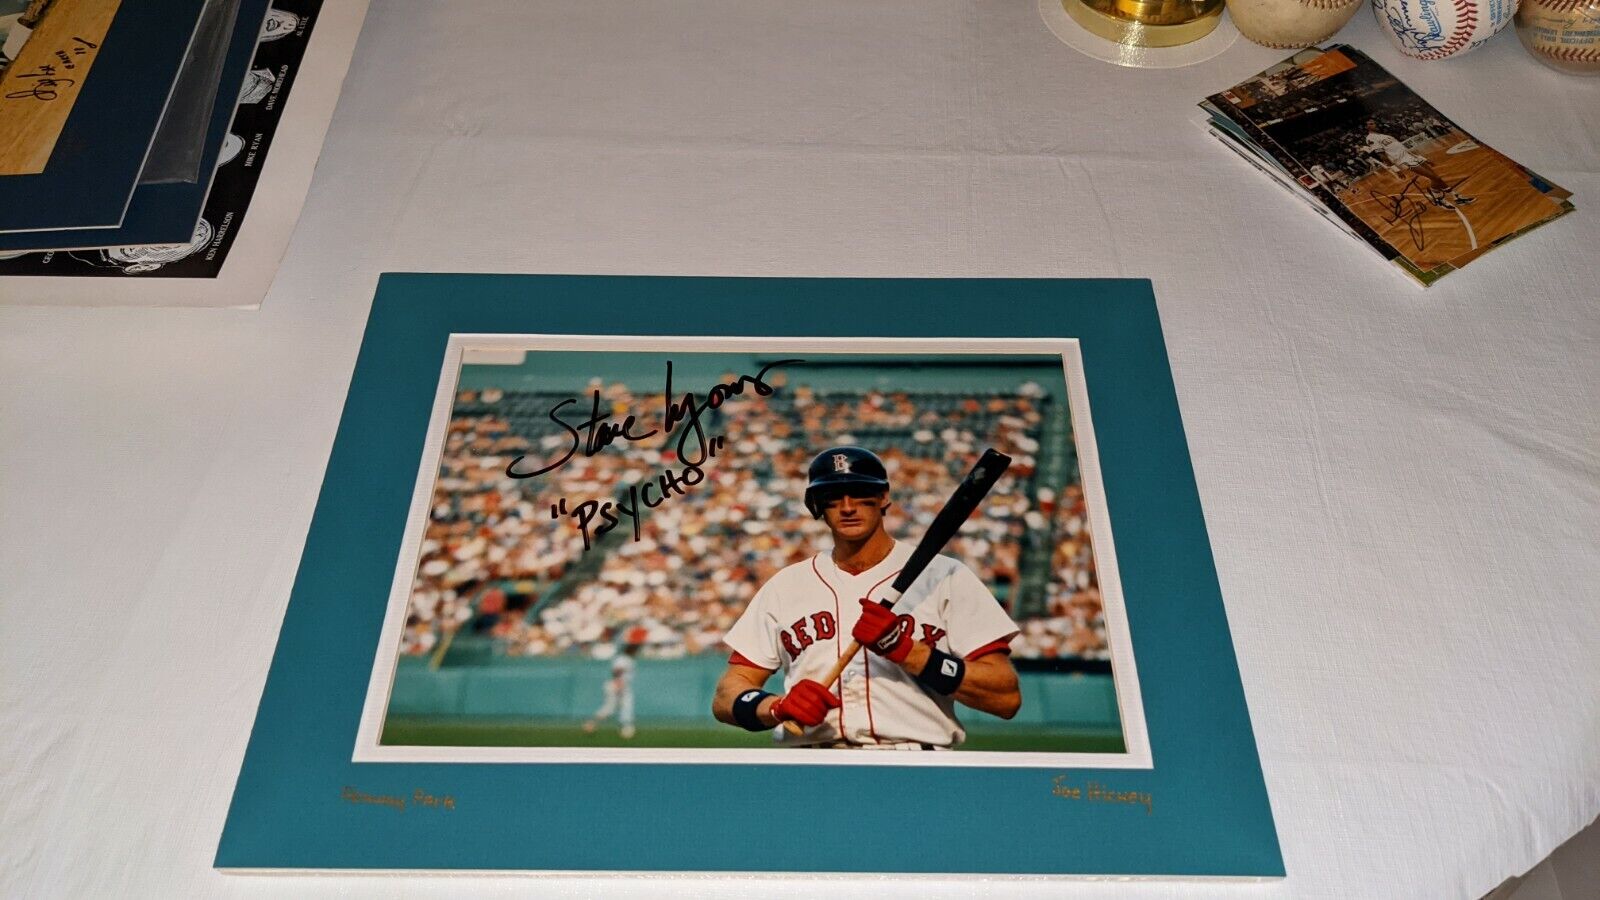 Steve Lyons Psycho Boston Red Sox Signed 8x10 Matted Photo Poster painting W/Our COA READ